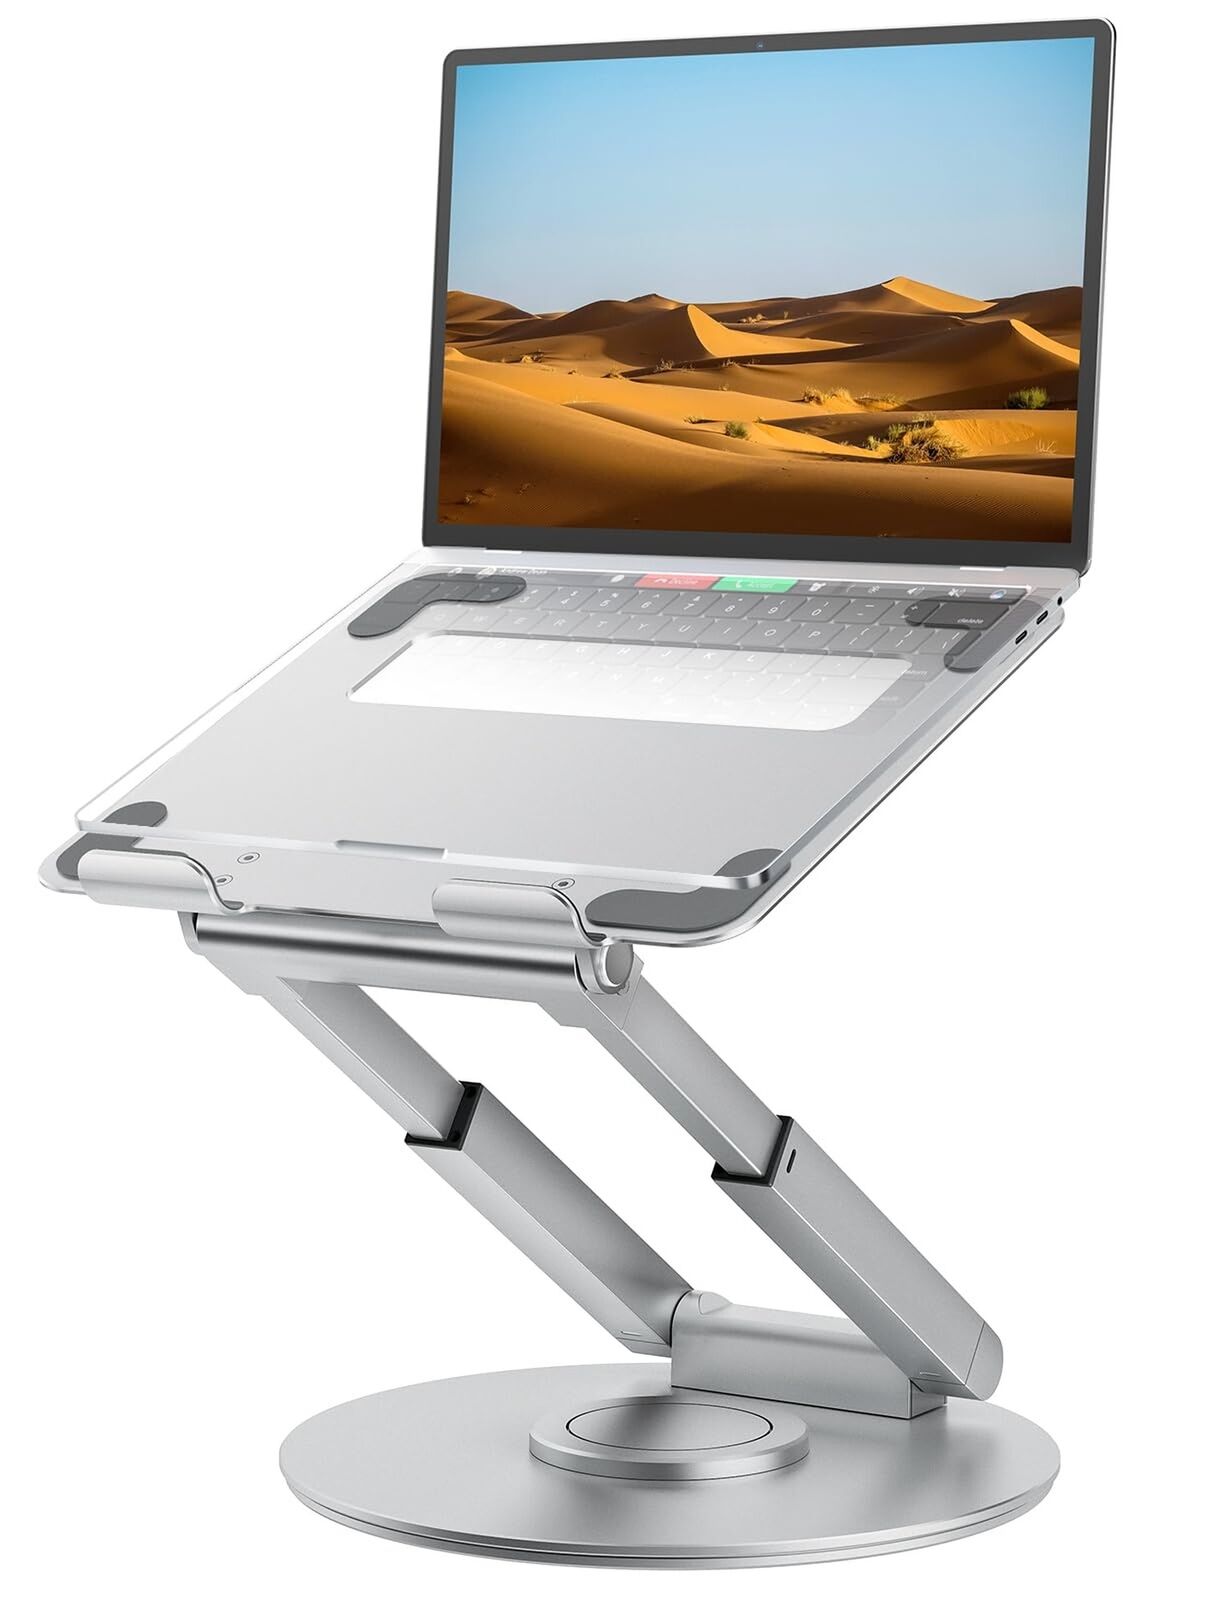 tounee Telescopic Laptop Stand for Desk with 360° Swivel Base, Sit to Stand